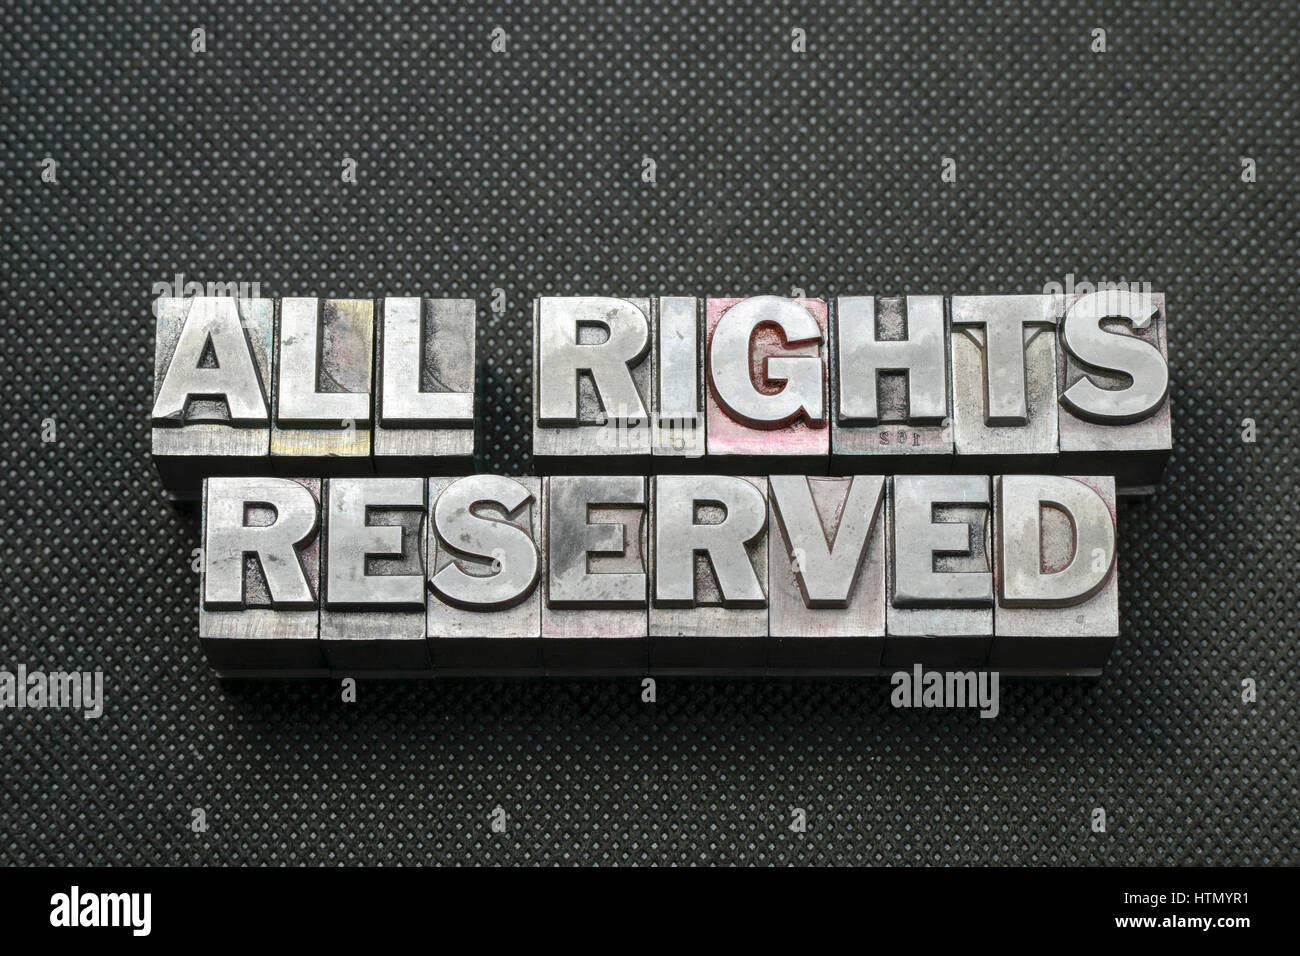 all rights reserved phrase made from metallic letterpress blocks on black perforated surface Stock Photo